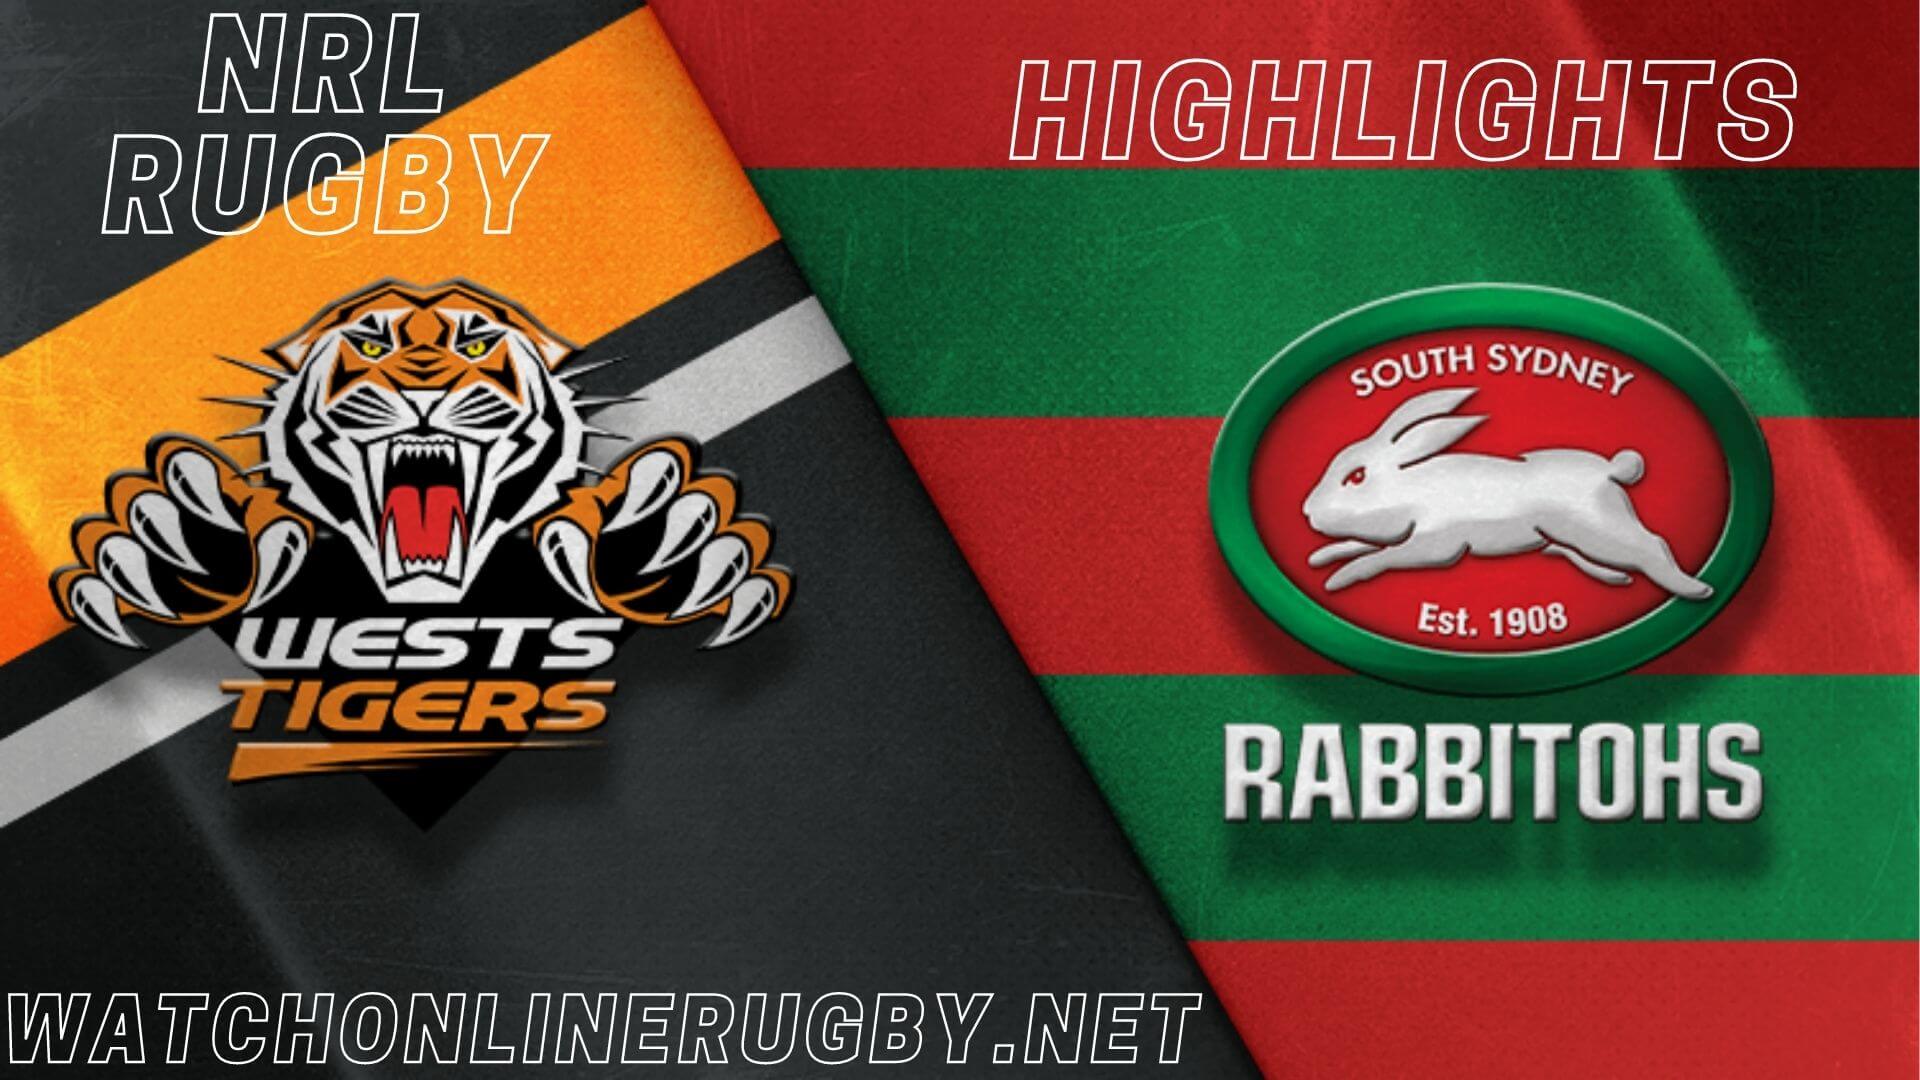 Wests Tigers Vs Rabbitohs Highlights RD 7 NRL Rugby